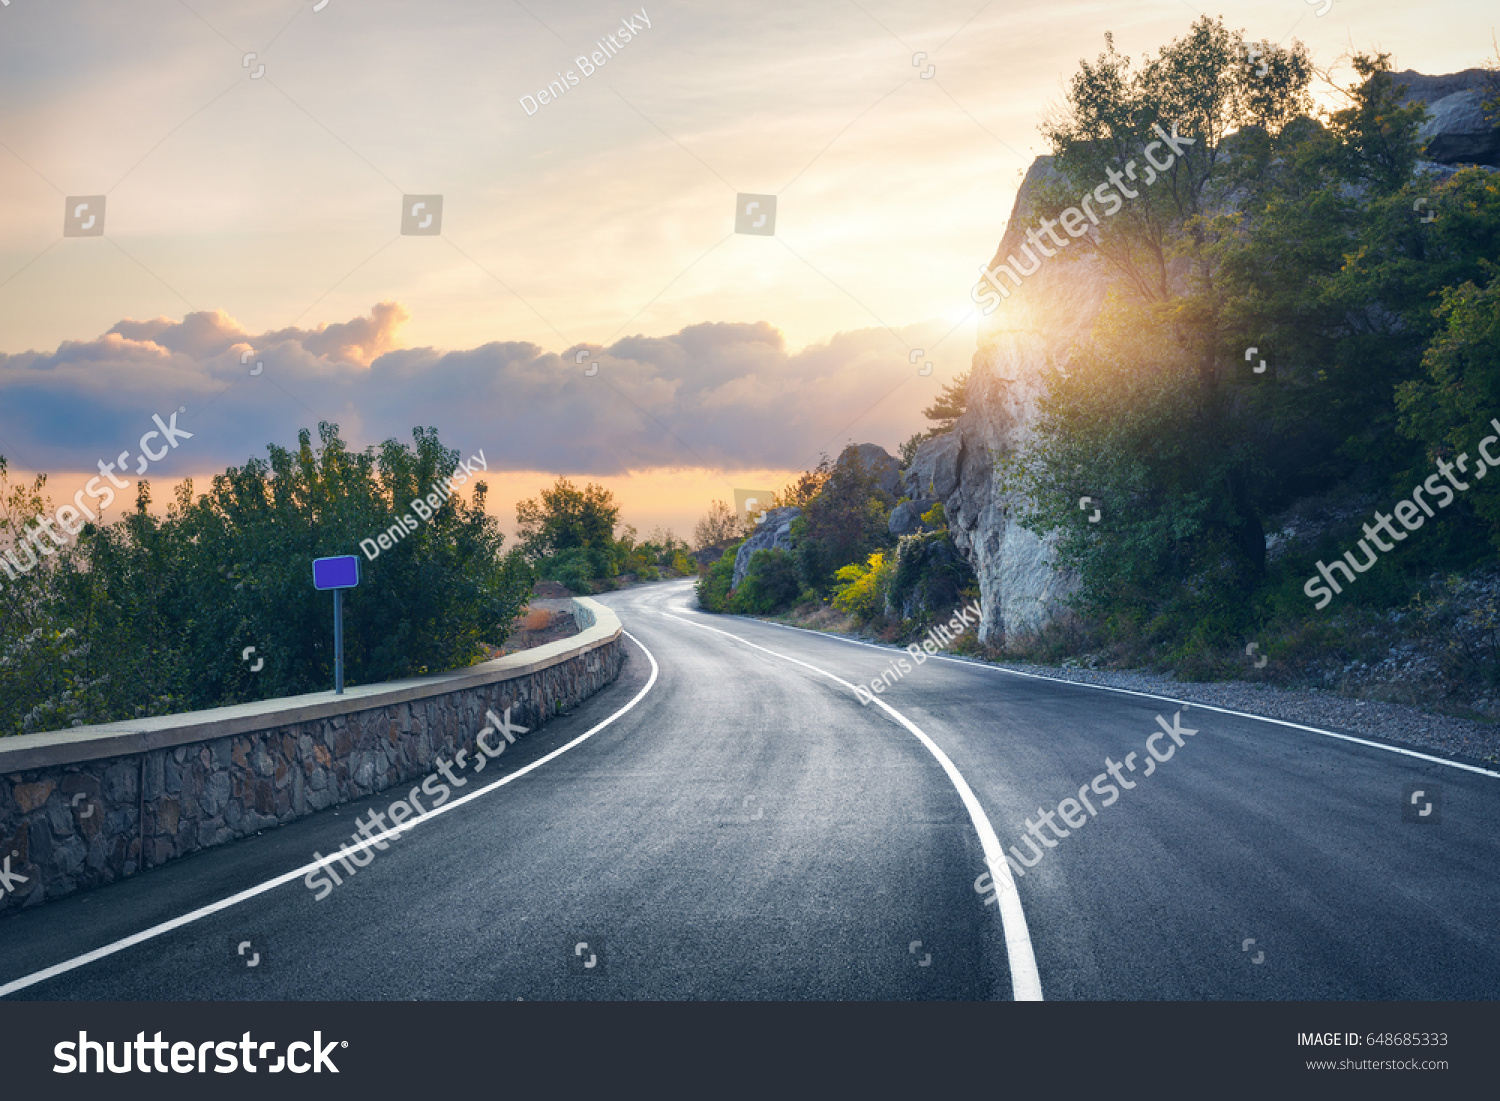 Mountain road. Landscape with rocks, sunny sky with clouds and beautiful asphalt road in the evening in summer. Vintage toning. Travel background. Highway in mountains. Transportation #648685333